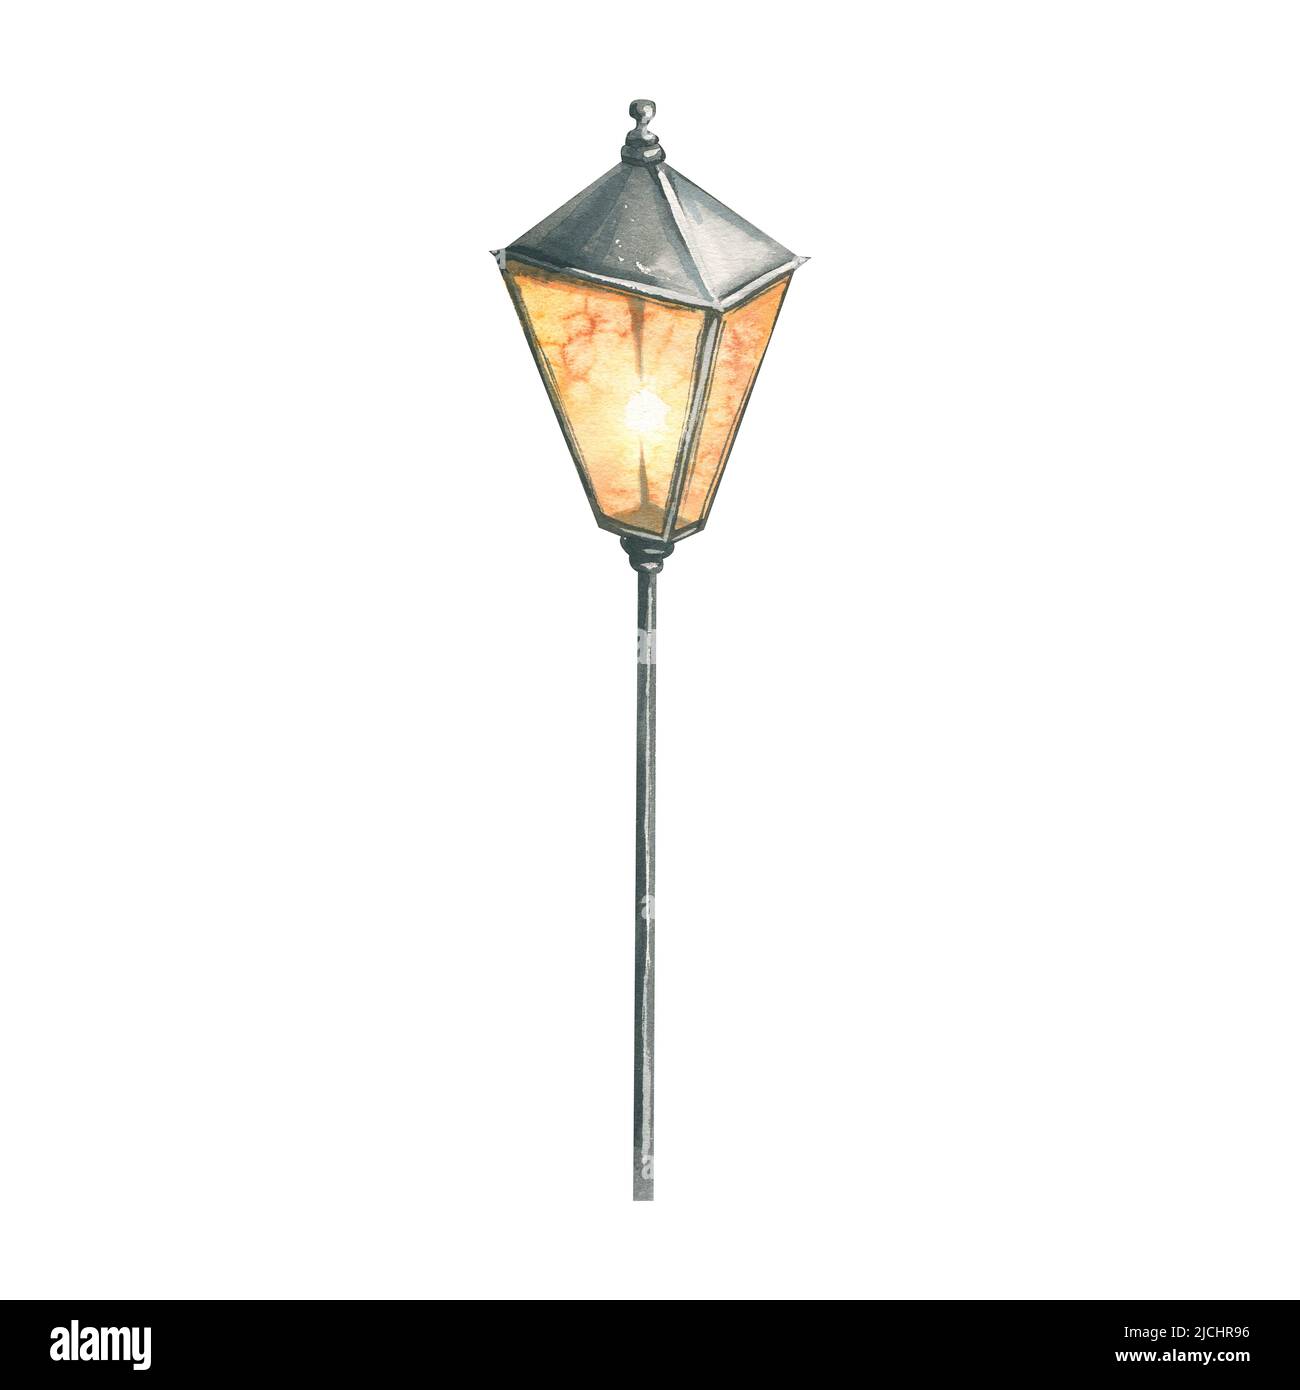 Watercolor illustration of a street lamp. A burning lantern on a pole, simple, black, isolated. For decoration, design, postcards, prints, wallpaper. Stock Photo